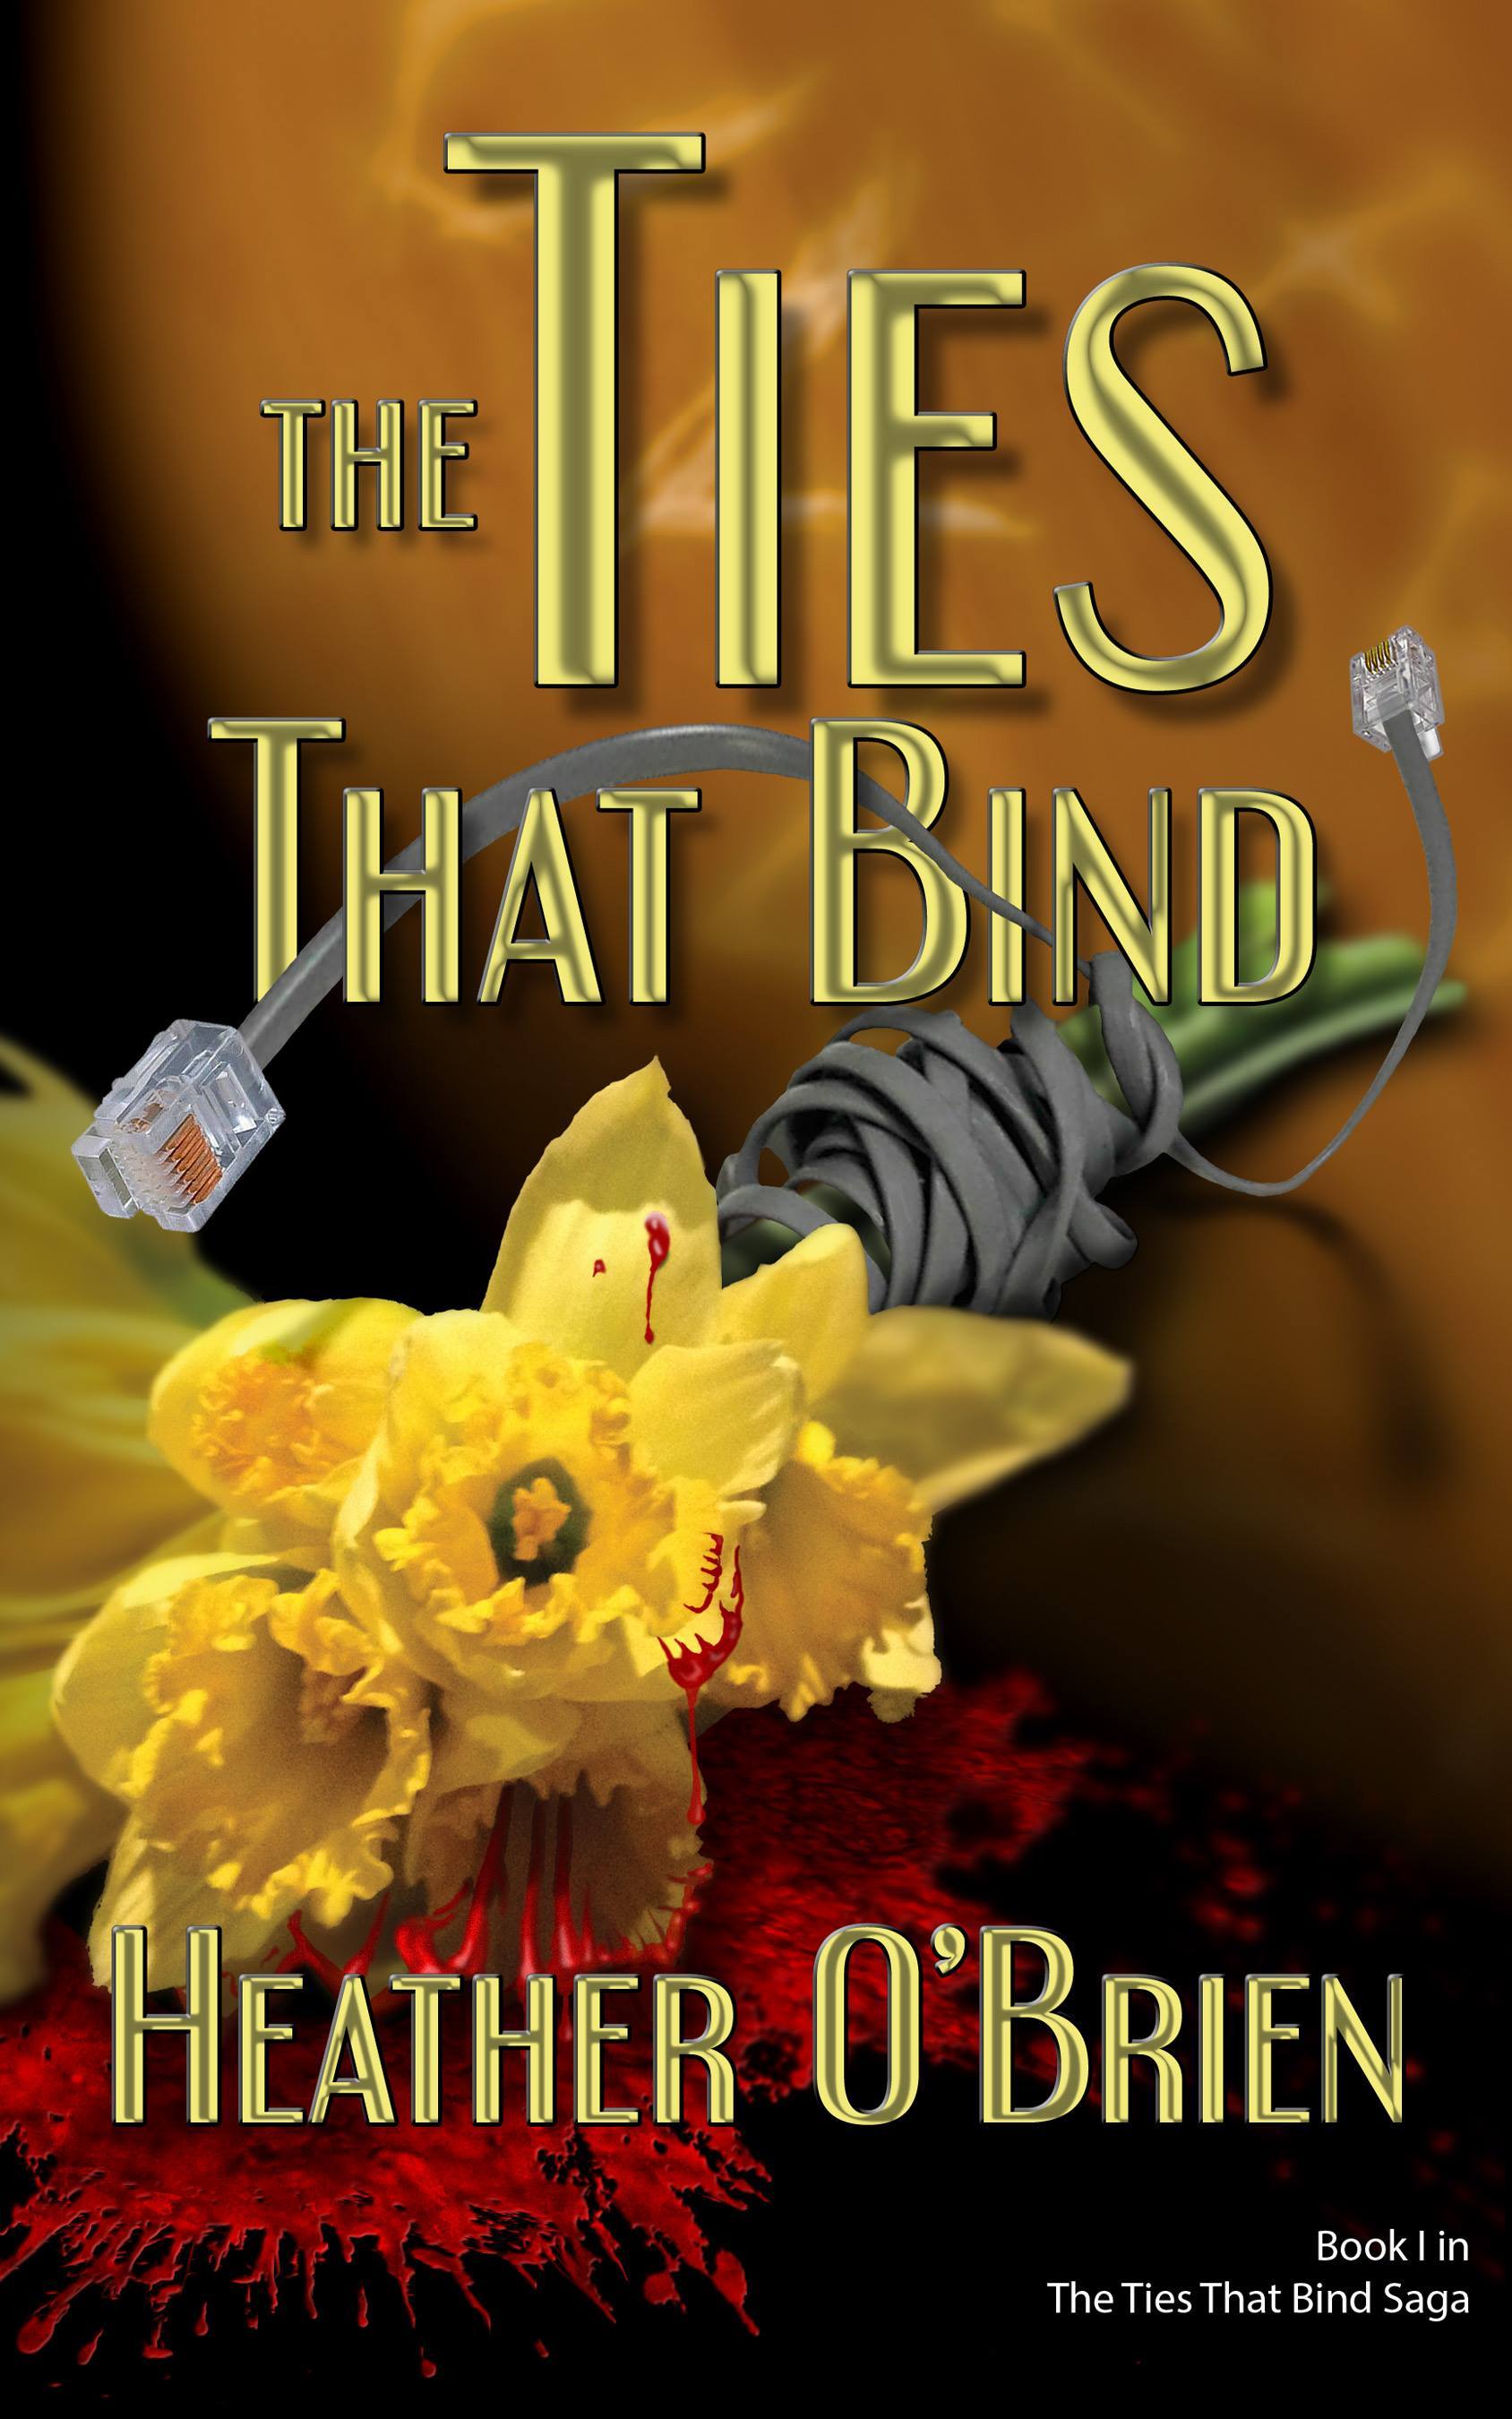 the ties that bind book